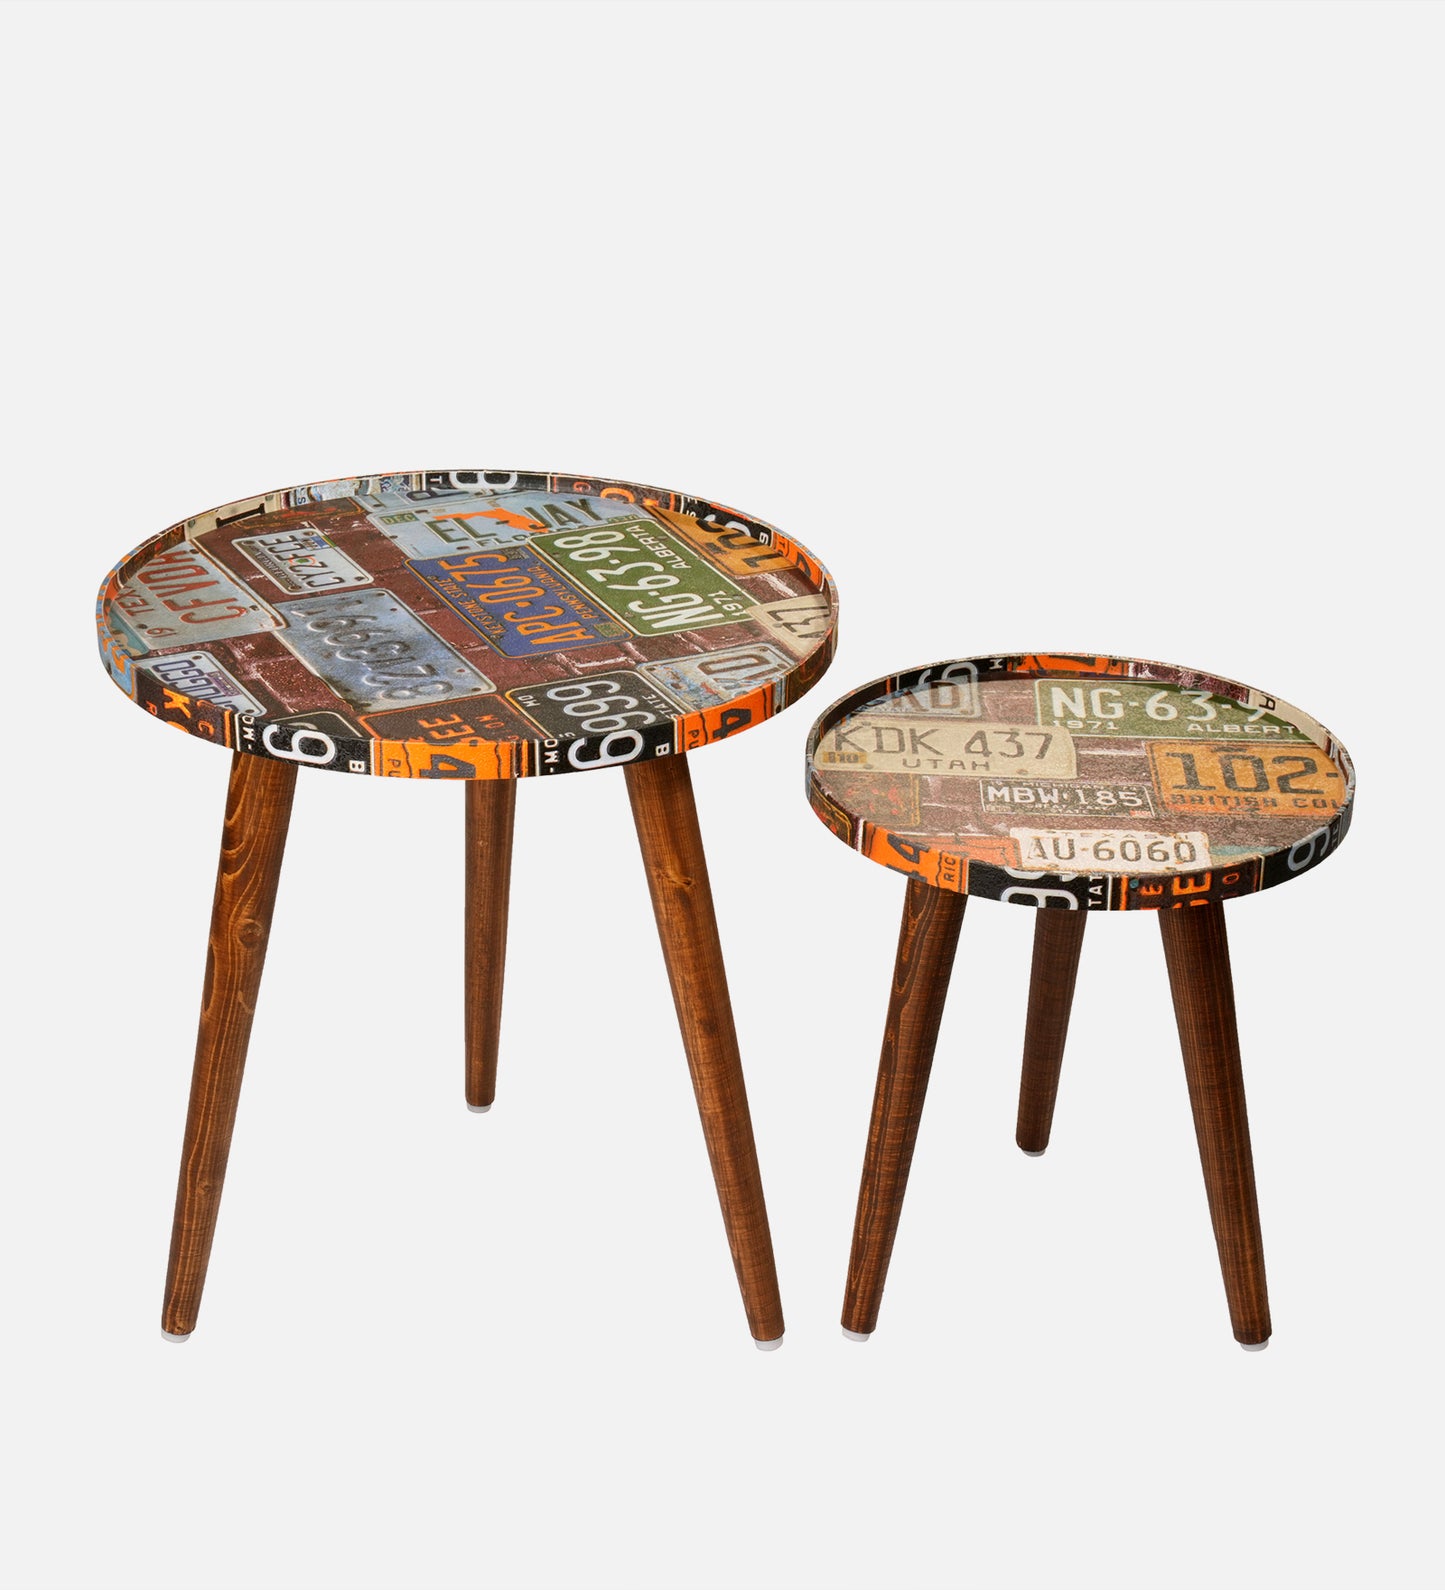 Muddy Miles Round Nesting Tables with Wooden Legs, Side Tables, Wooden Tables, Living Room Decor by A Tiny Mistake